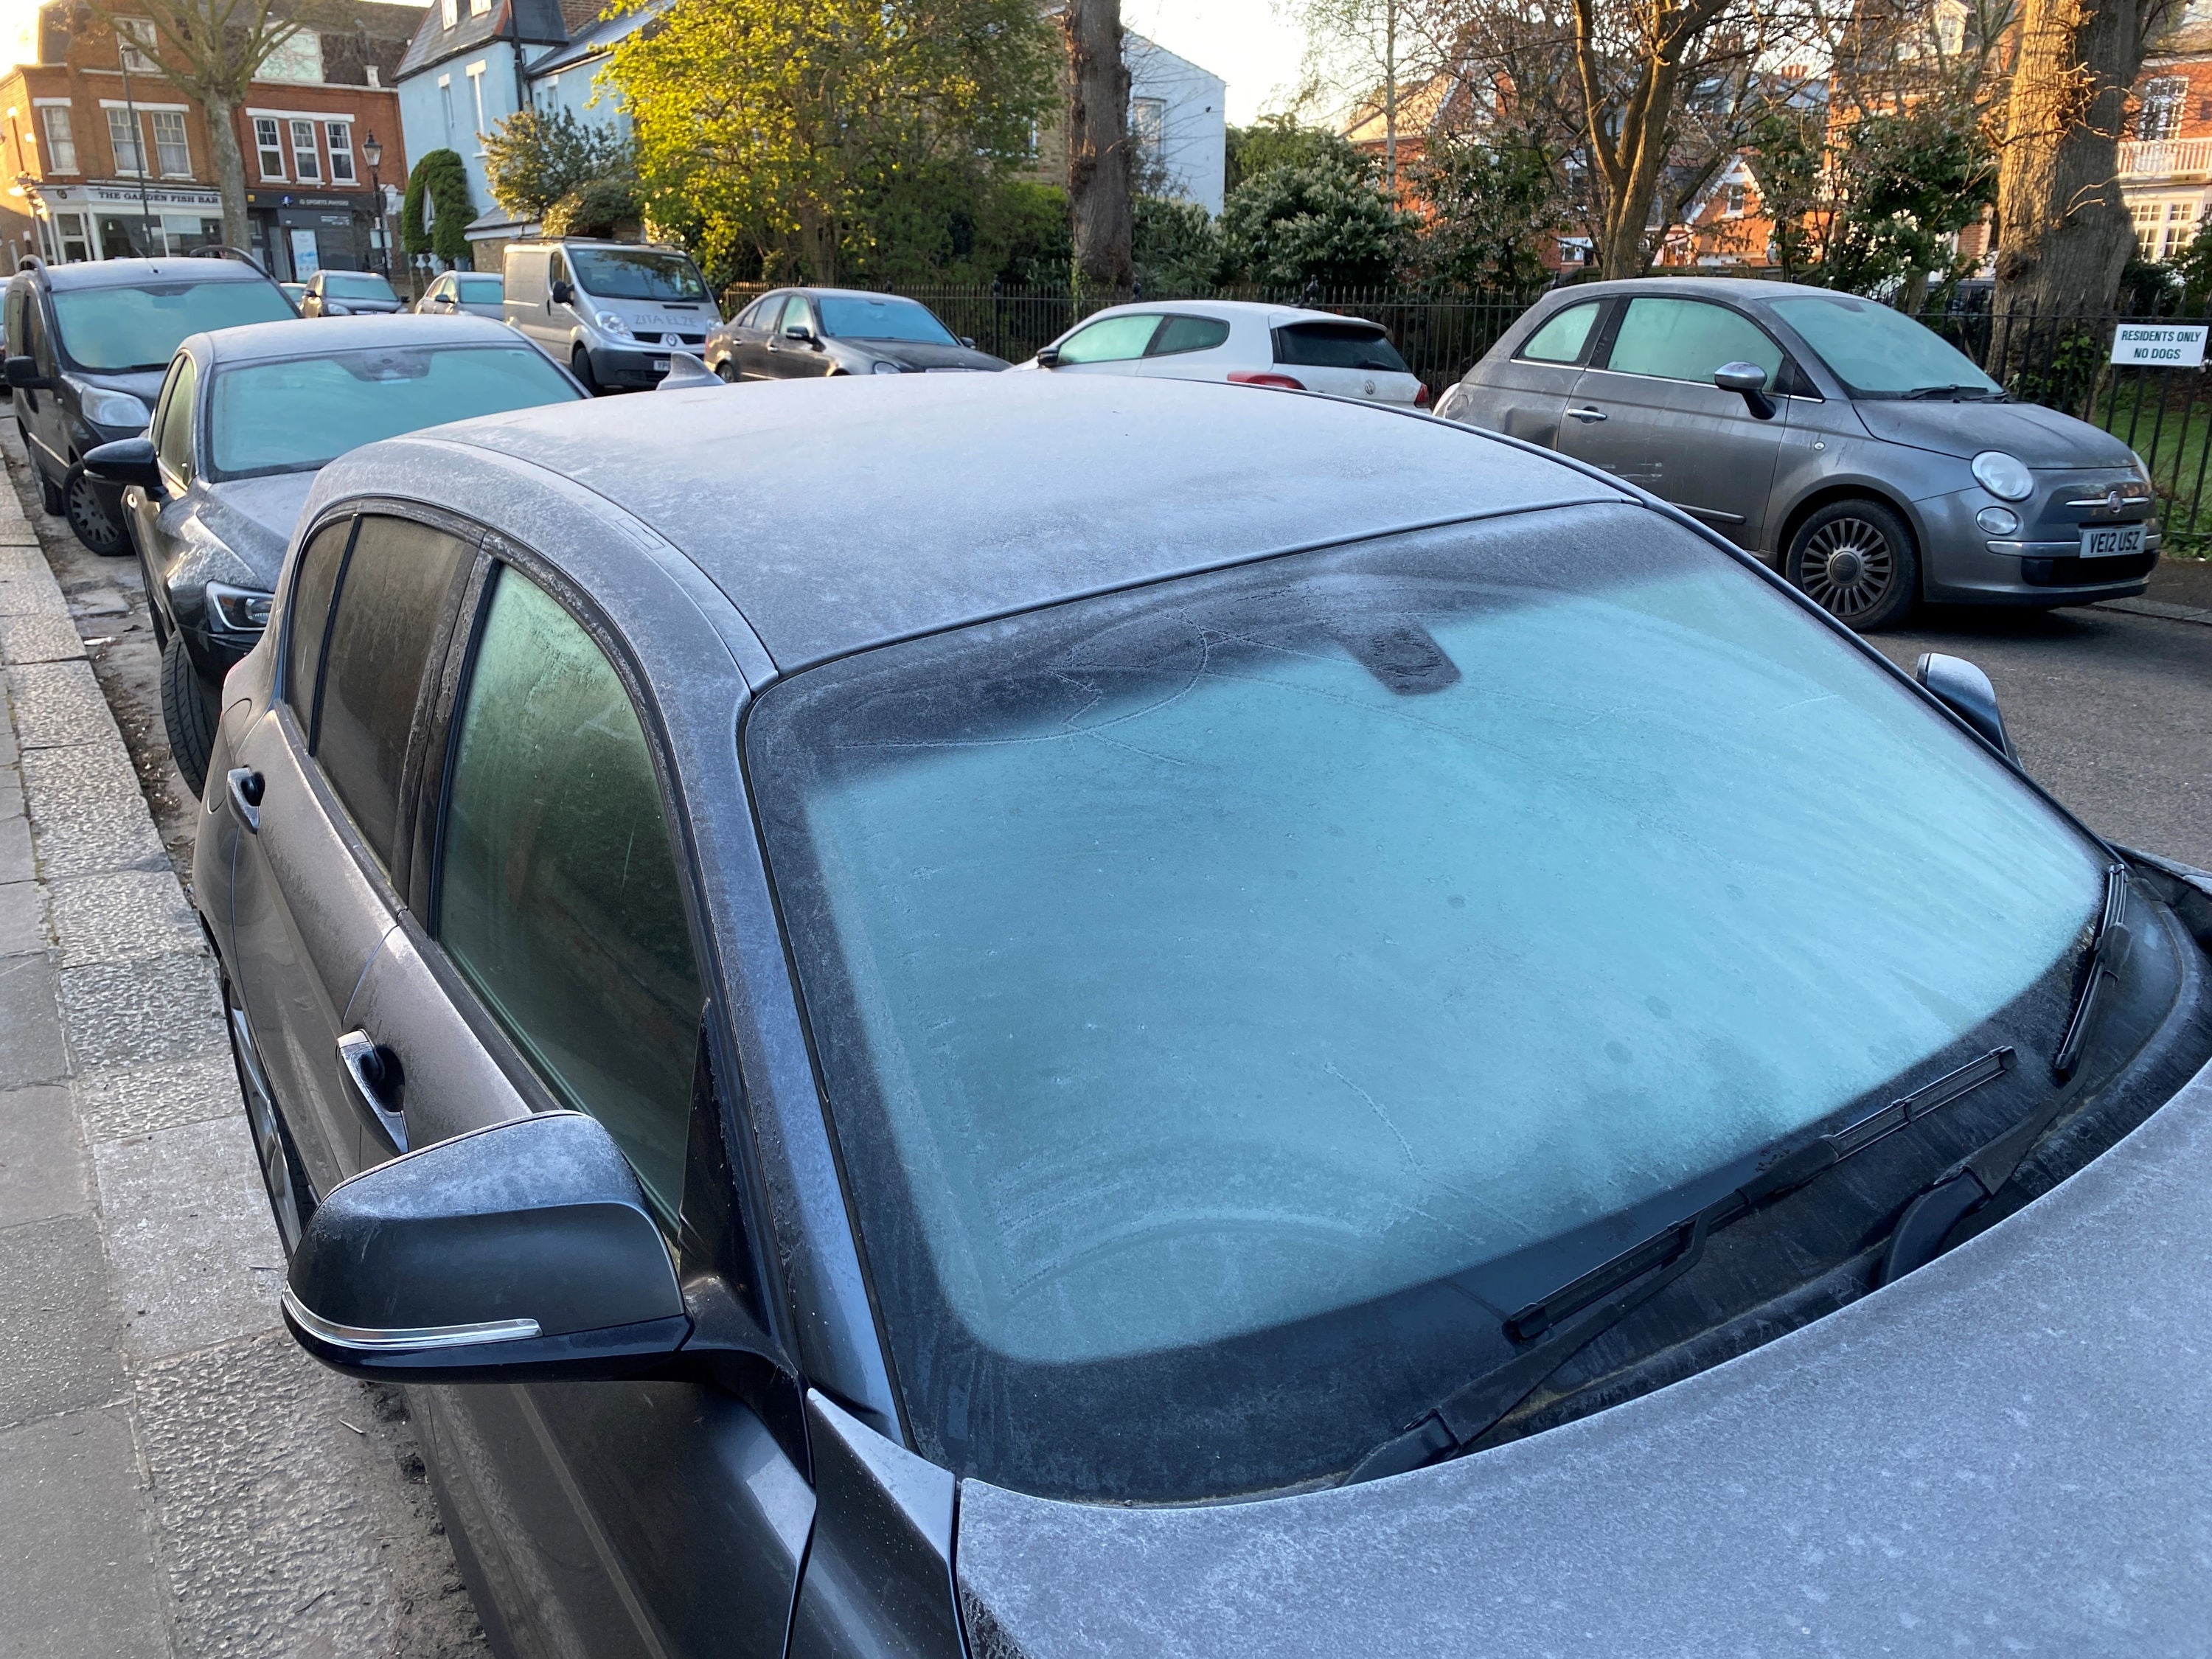 Frost covers cars early in the morning today in Kew, south-west London